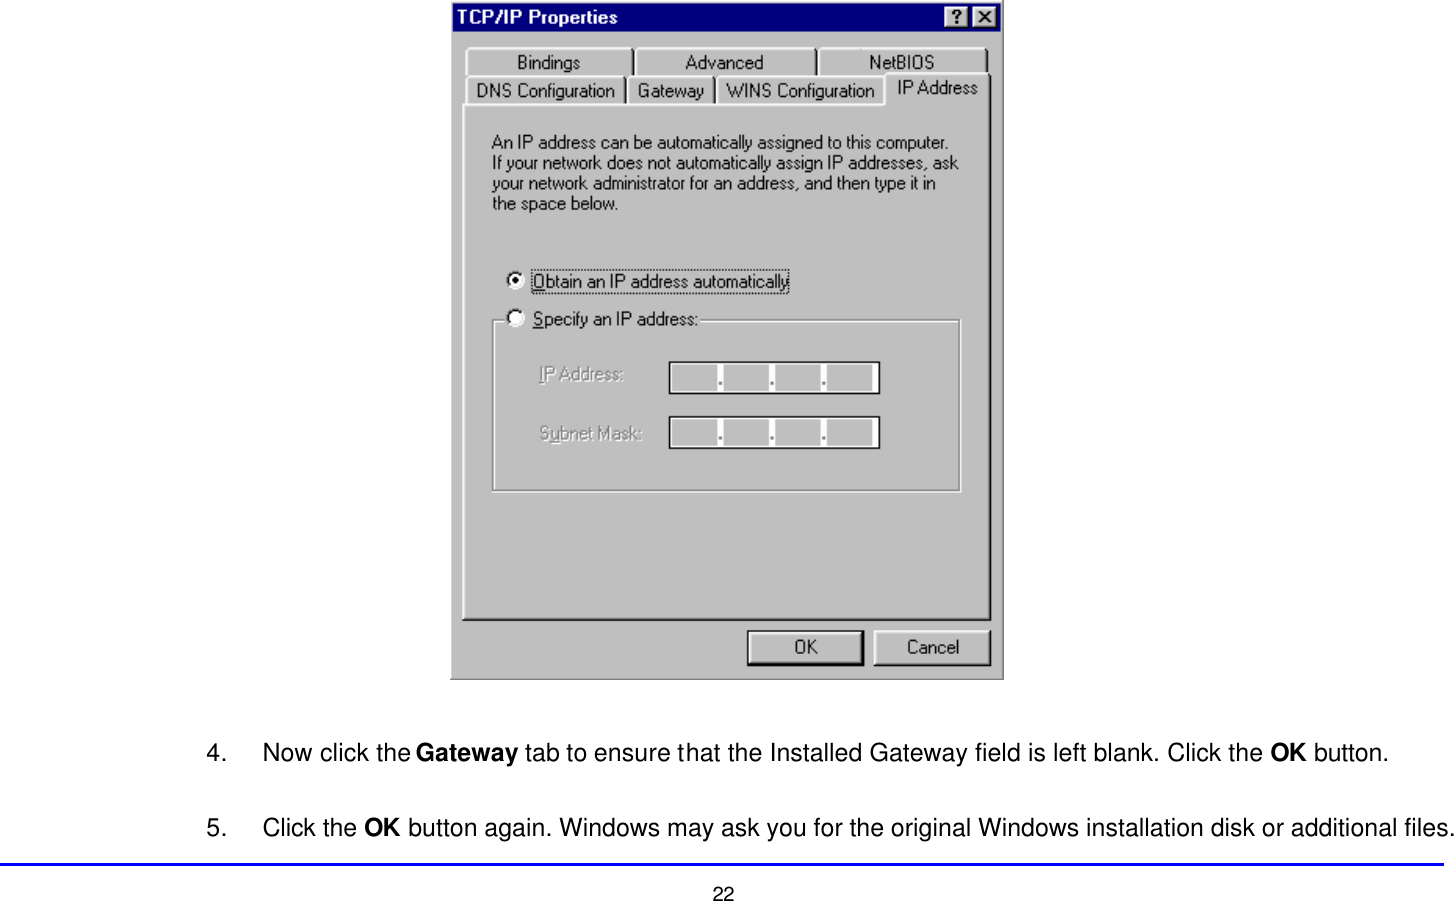  22   4. Now click the Gateway tab to ensure that the Installed Gateway field is left blank. Click the OK button.  5. Click the OK button again. Windows may ask you for the original Windows installation disk or additional files. 